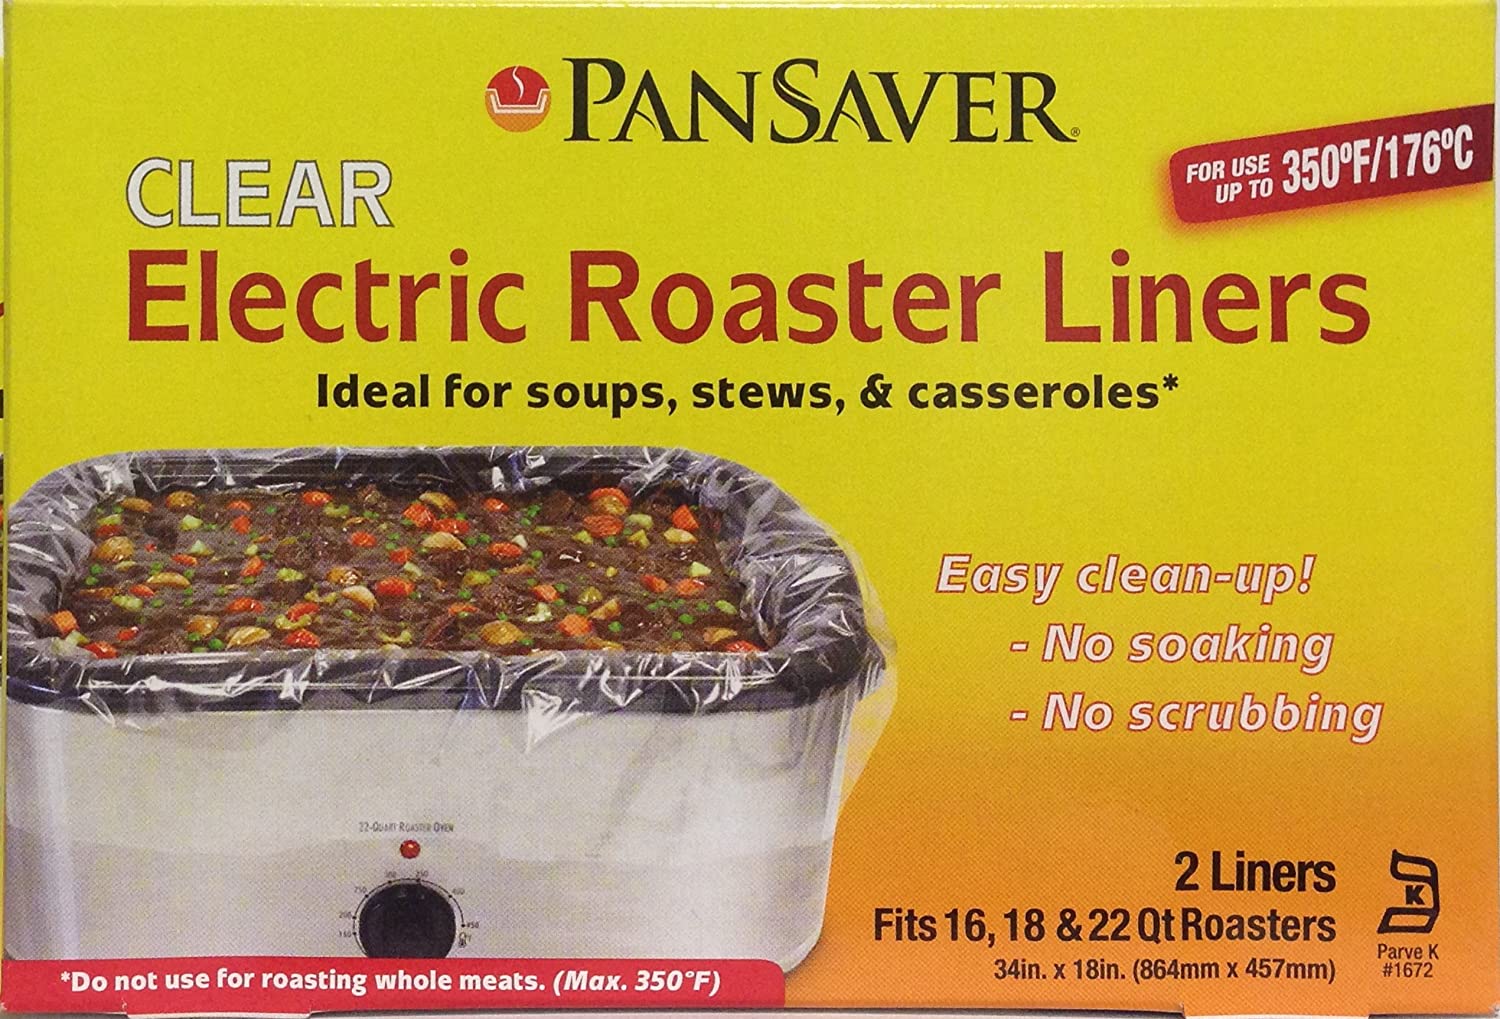 PanSaver Slow Cooker Liners 6/4 ct. Boxes (24 liners) EACH